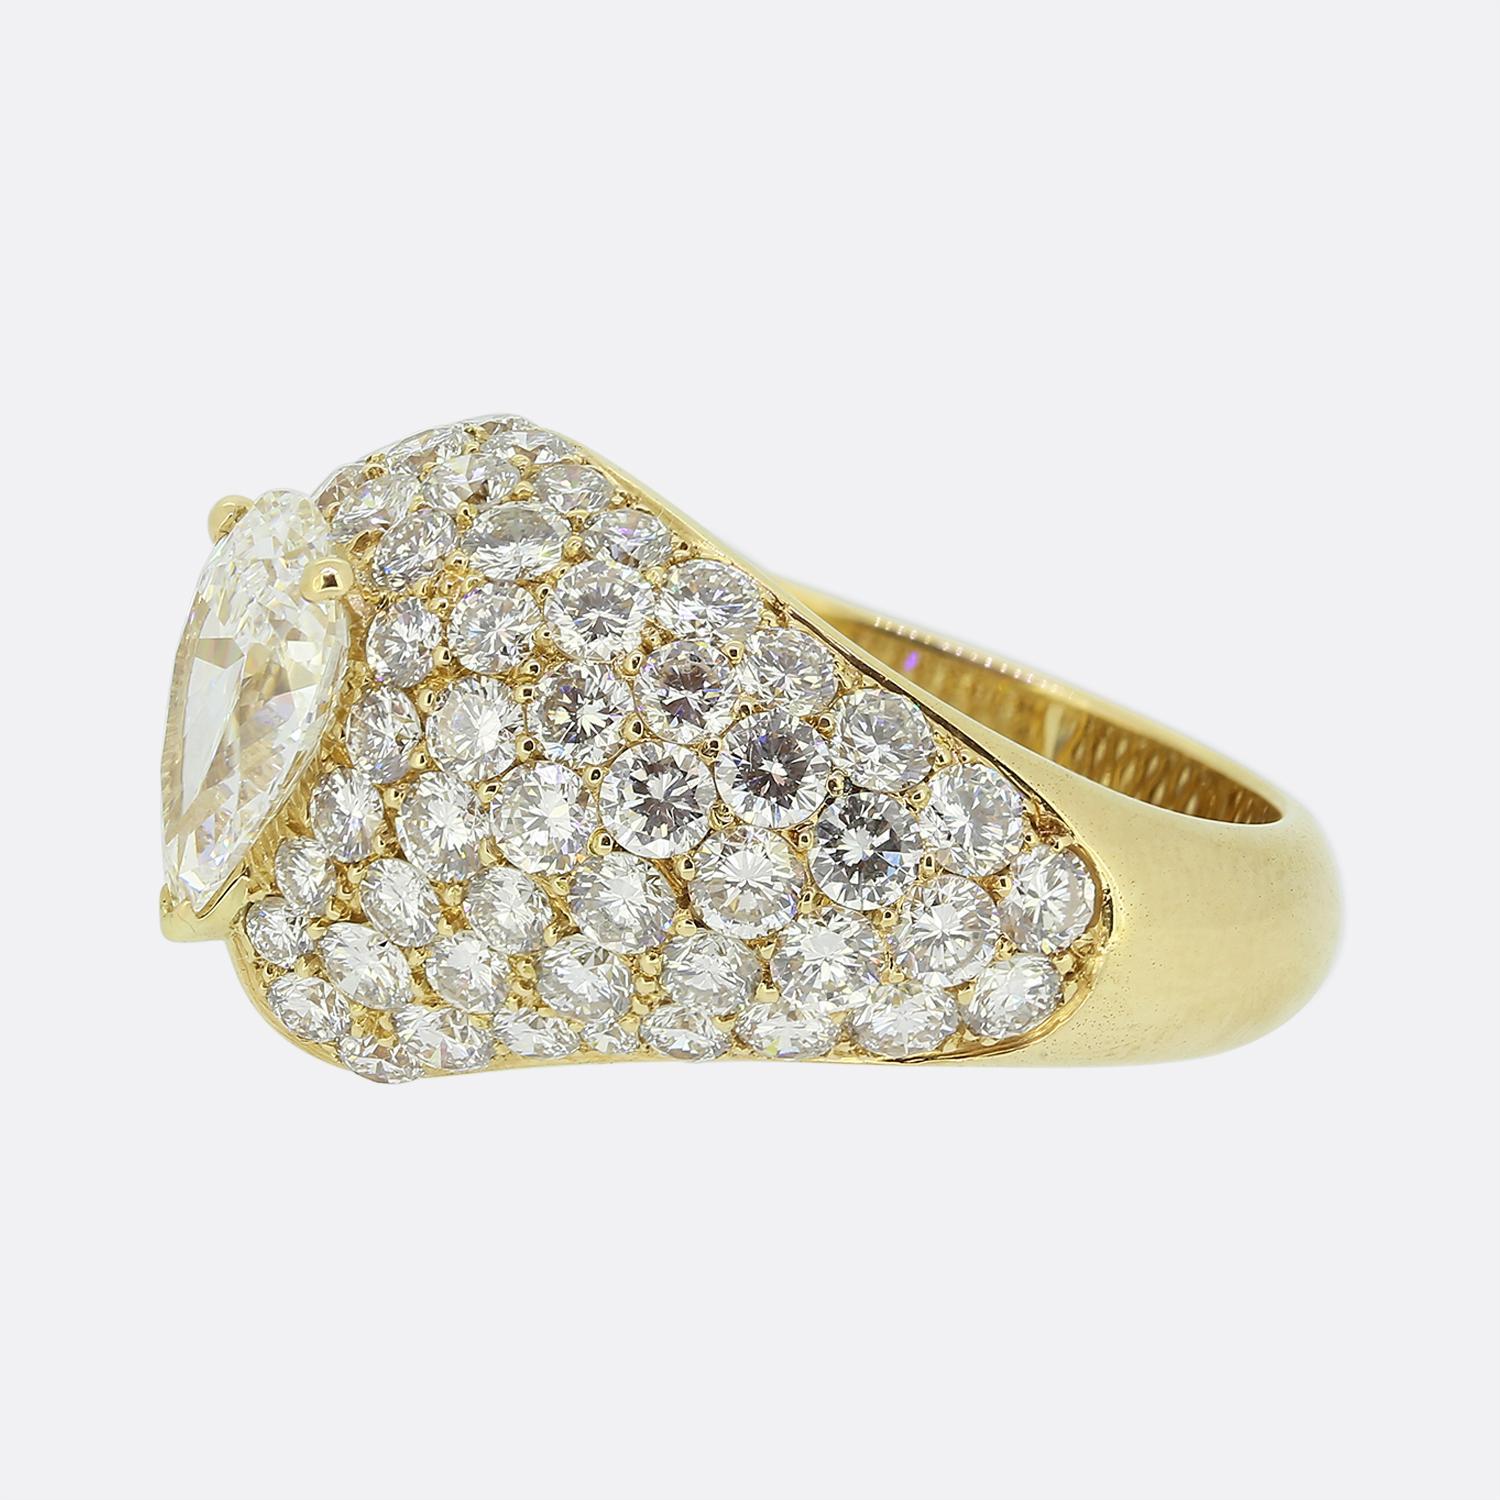 Here we have a gorgeous diamond dress ring from the world renowned luxury jewellery house of Cartier. This piece has been crafted from 18ct yellow gold and features a remarkable 1.44ct pear cut diamond at the centre of the face in a contemporary